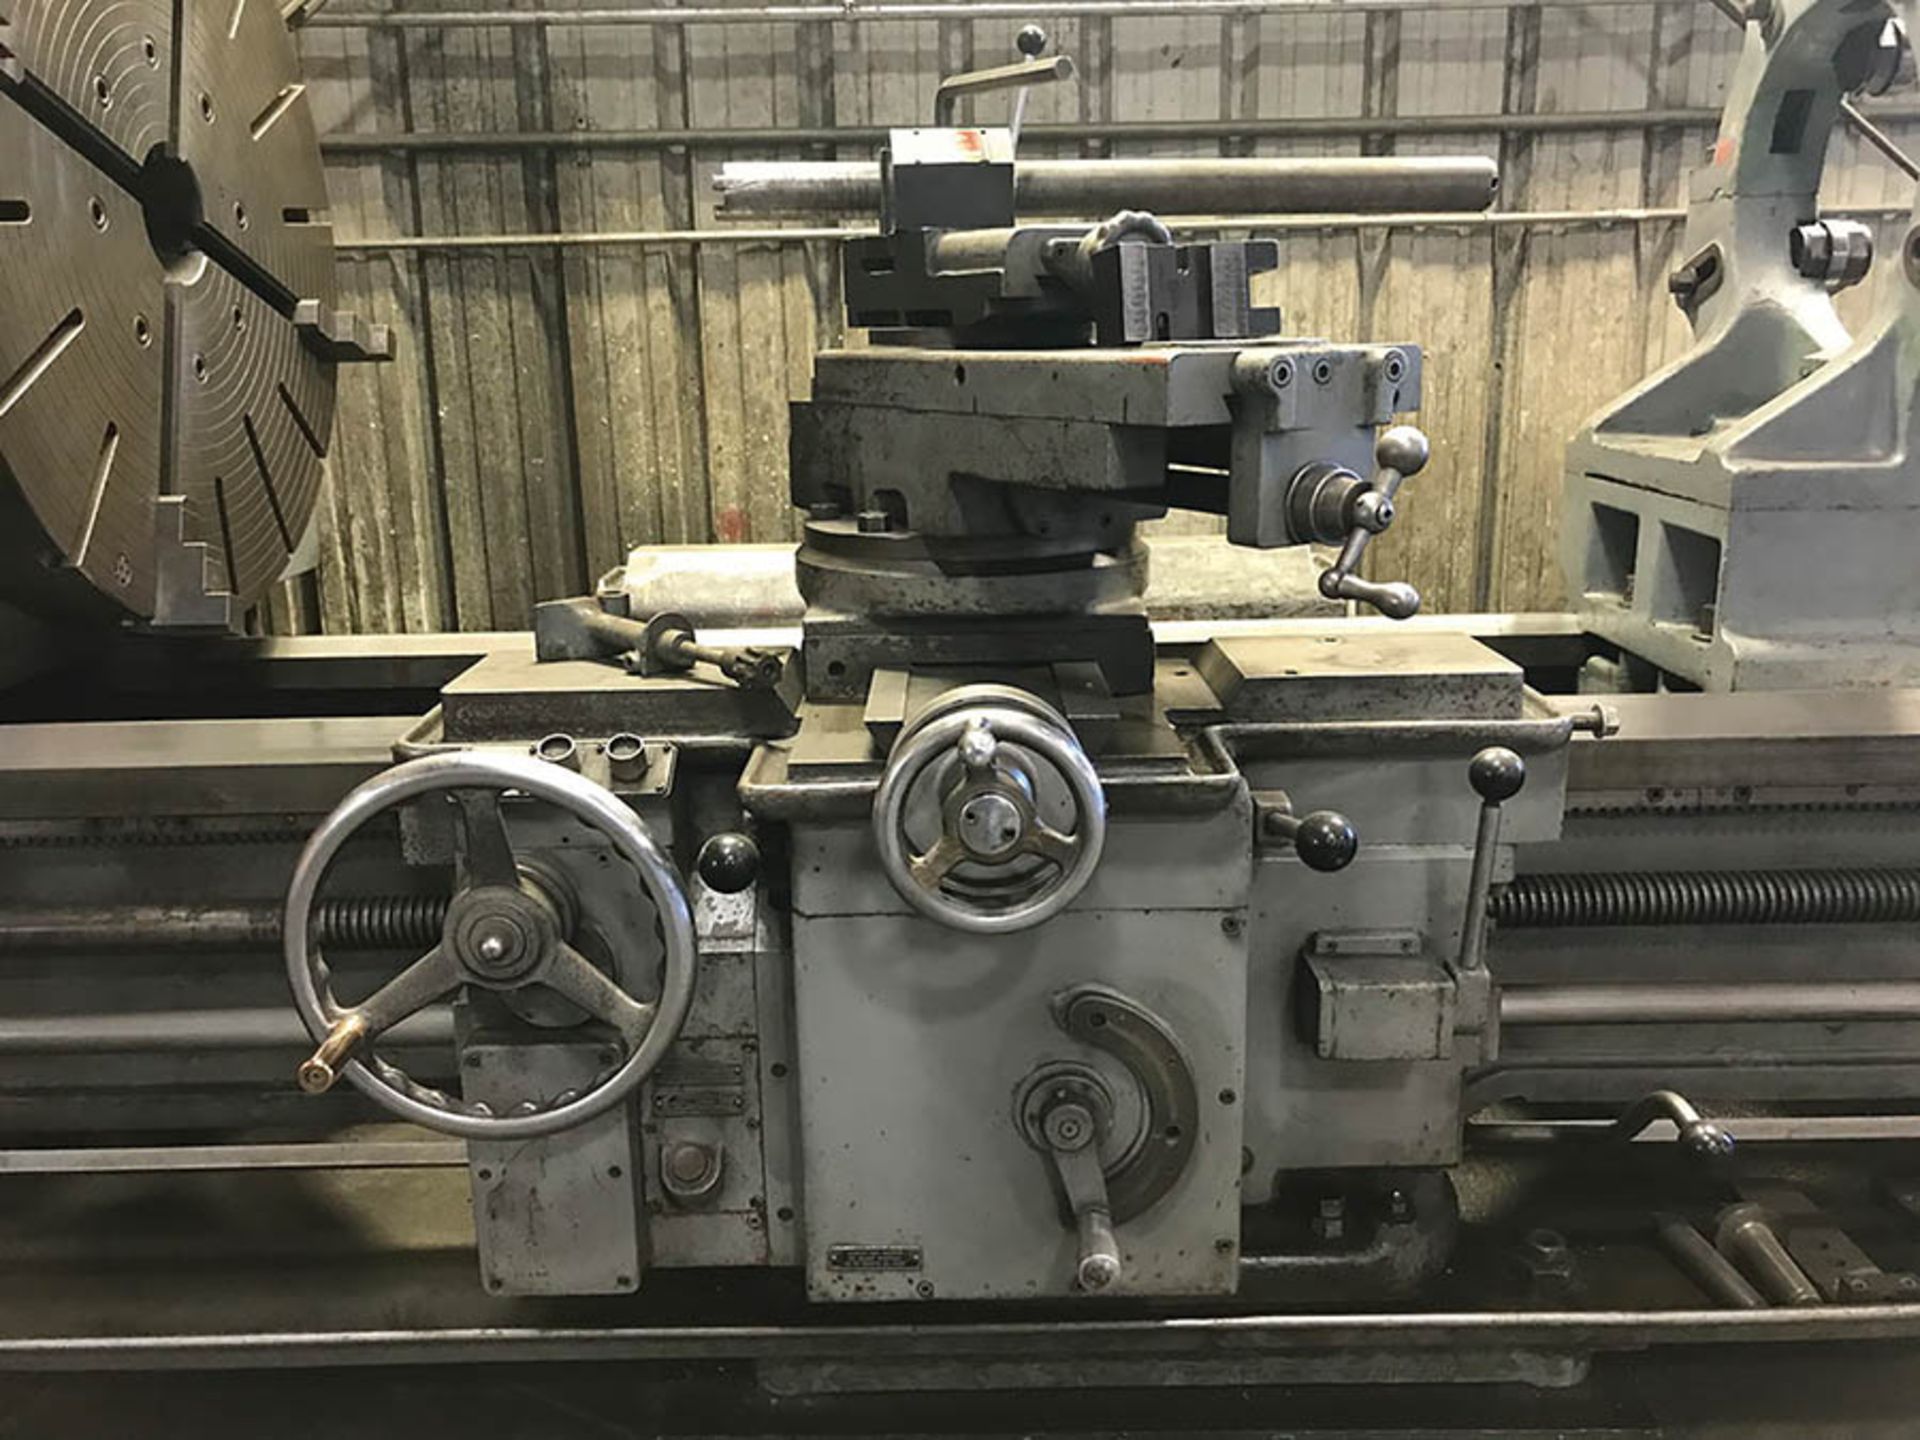 MONARCH ENGINE LATHE, MODEL 32''NN, S/N 40993, 48'' SWING, 108'' BETWEEN CENTERS, 12-606 SPINDLE - Image 8 of 10